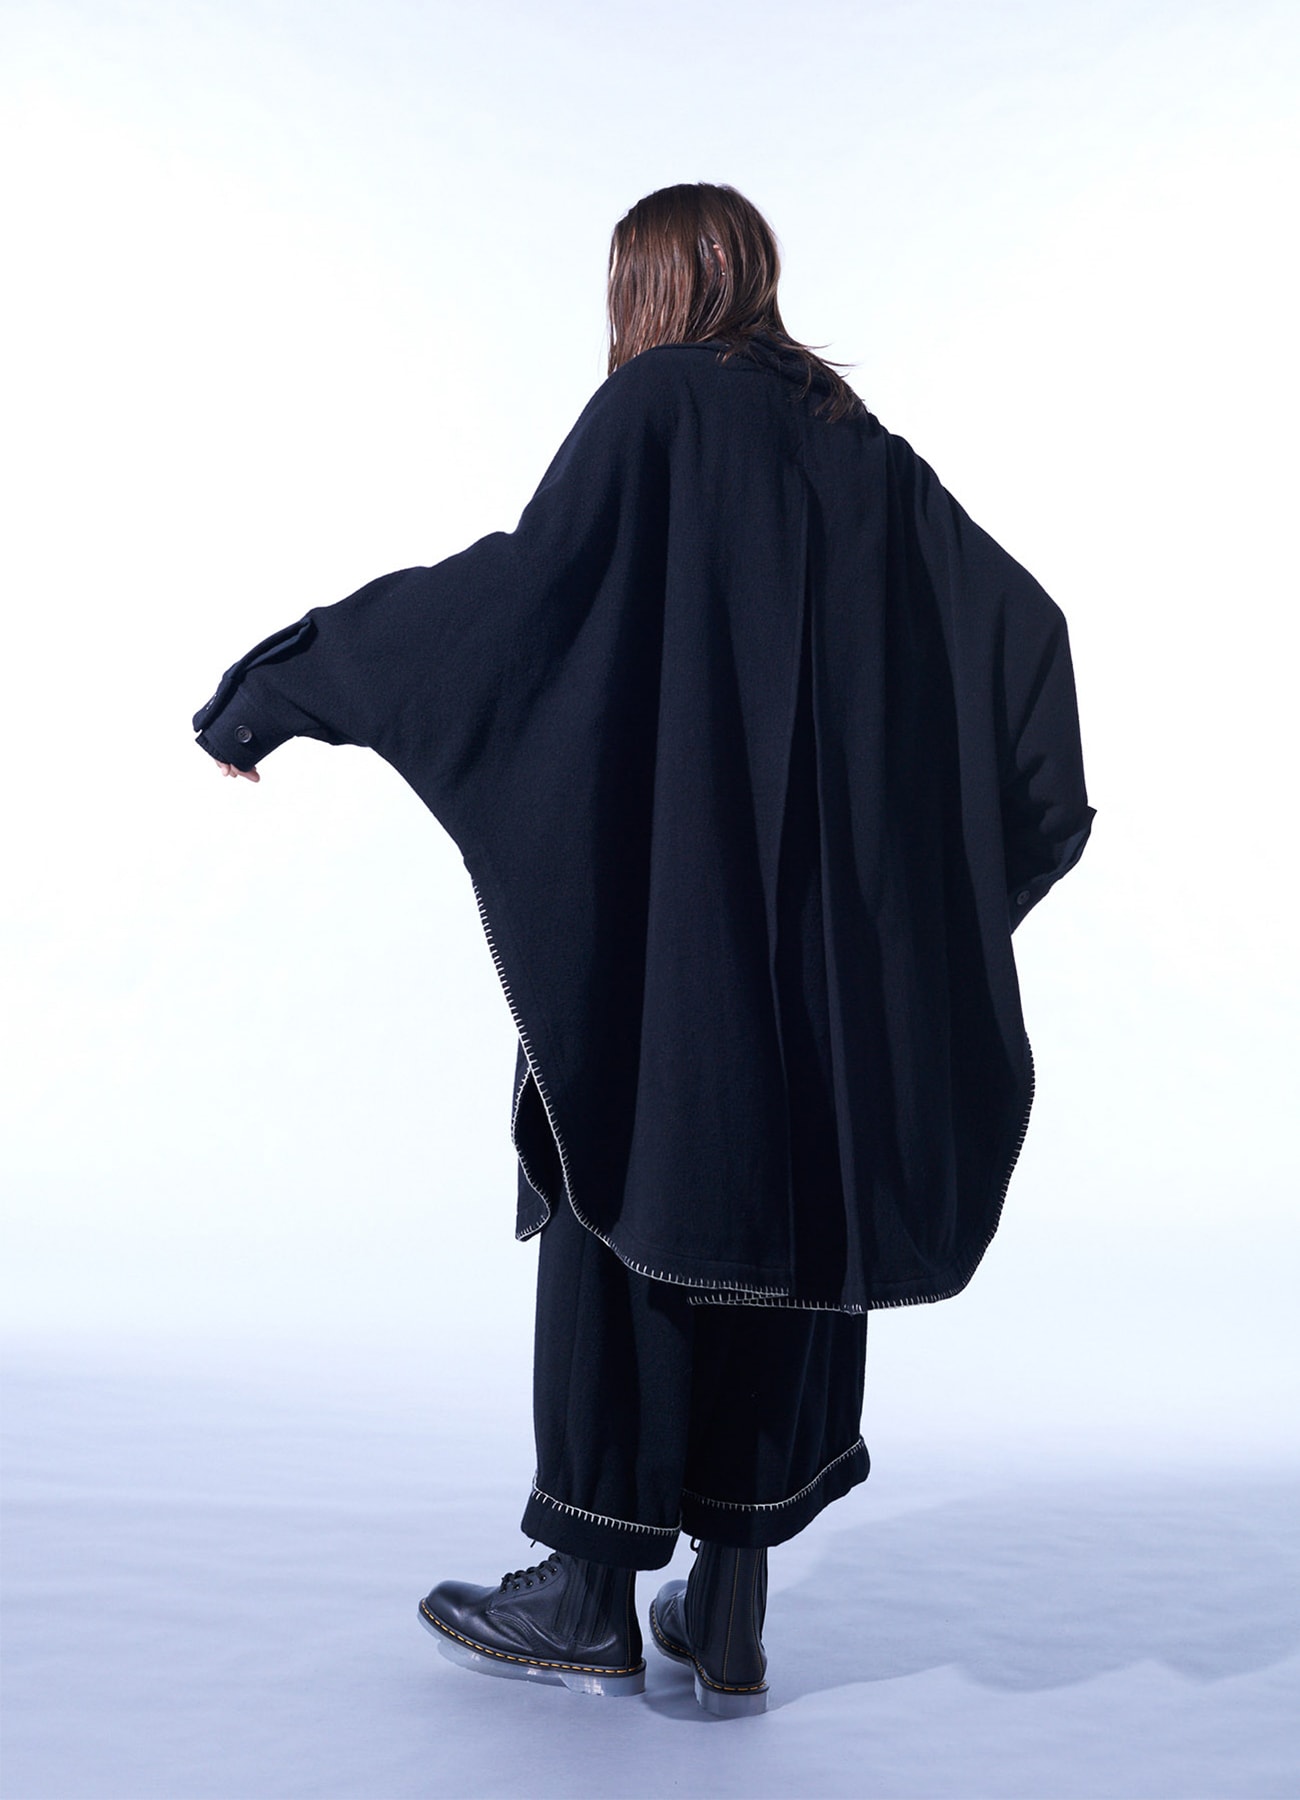 W/TOP MOSSA STOLE COLLAR BIG SILHOUETTE COAT WITH BLANKET STITCH DESIGN